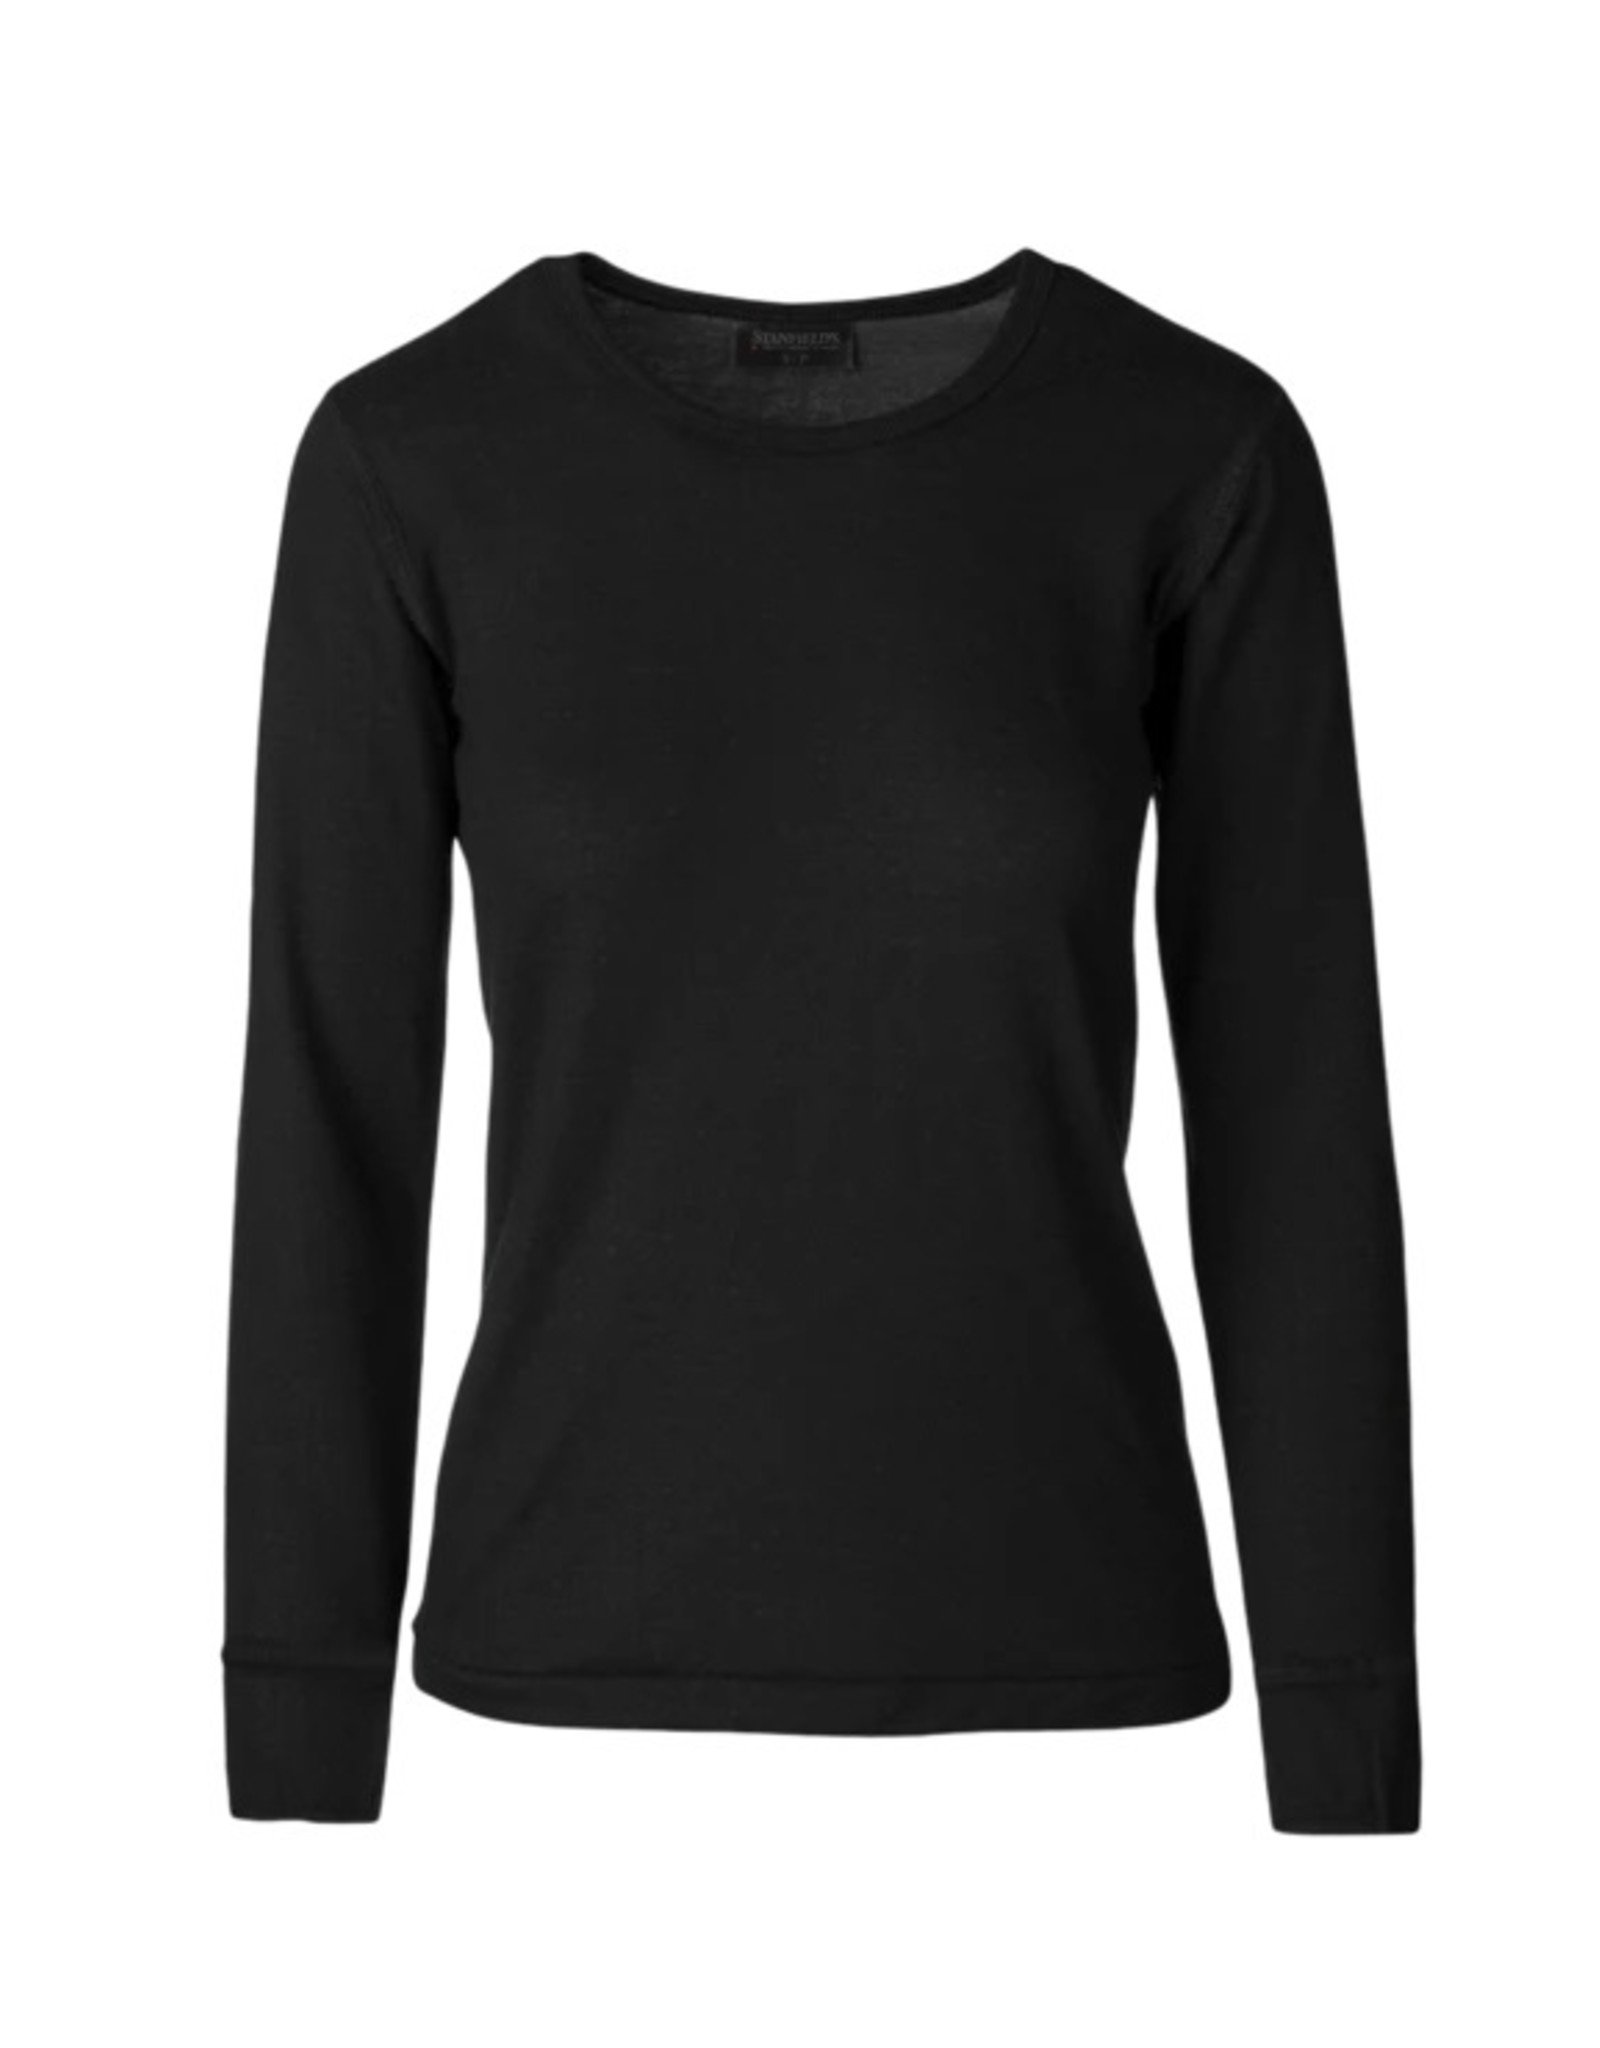 STANFIELDS ESSENTIALS WOMEN'S 2 LAYER THERMAL BASE LAYER LONG SLEEVE TOP